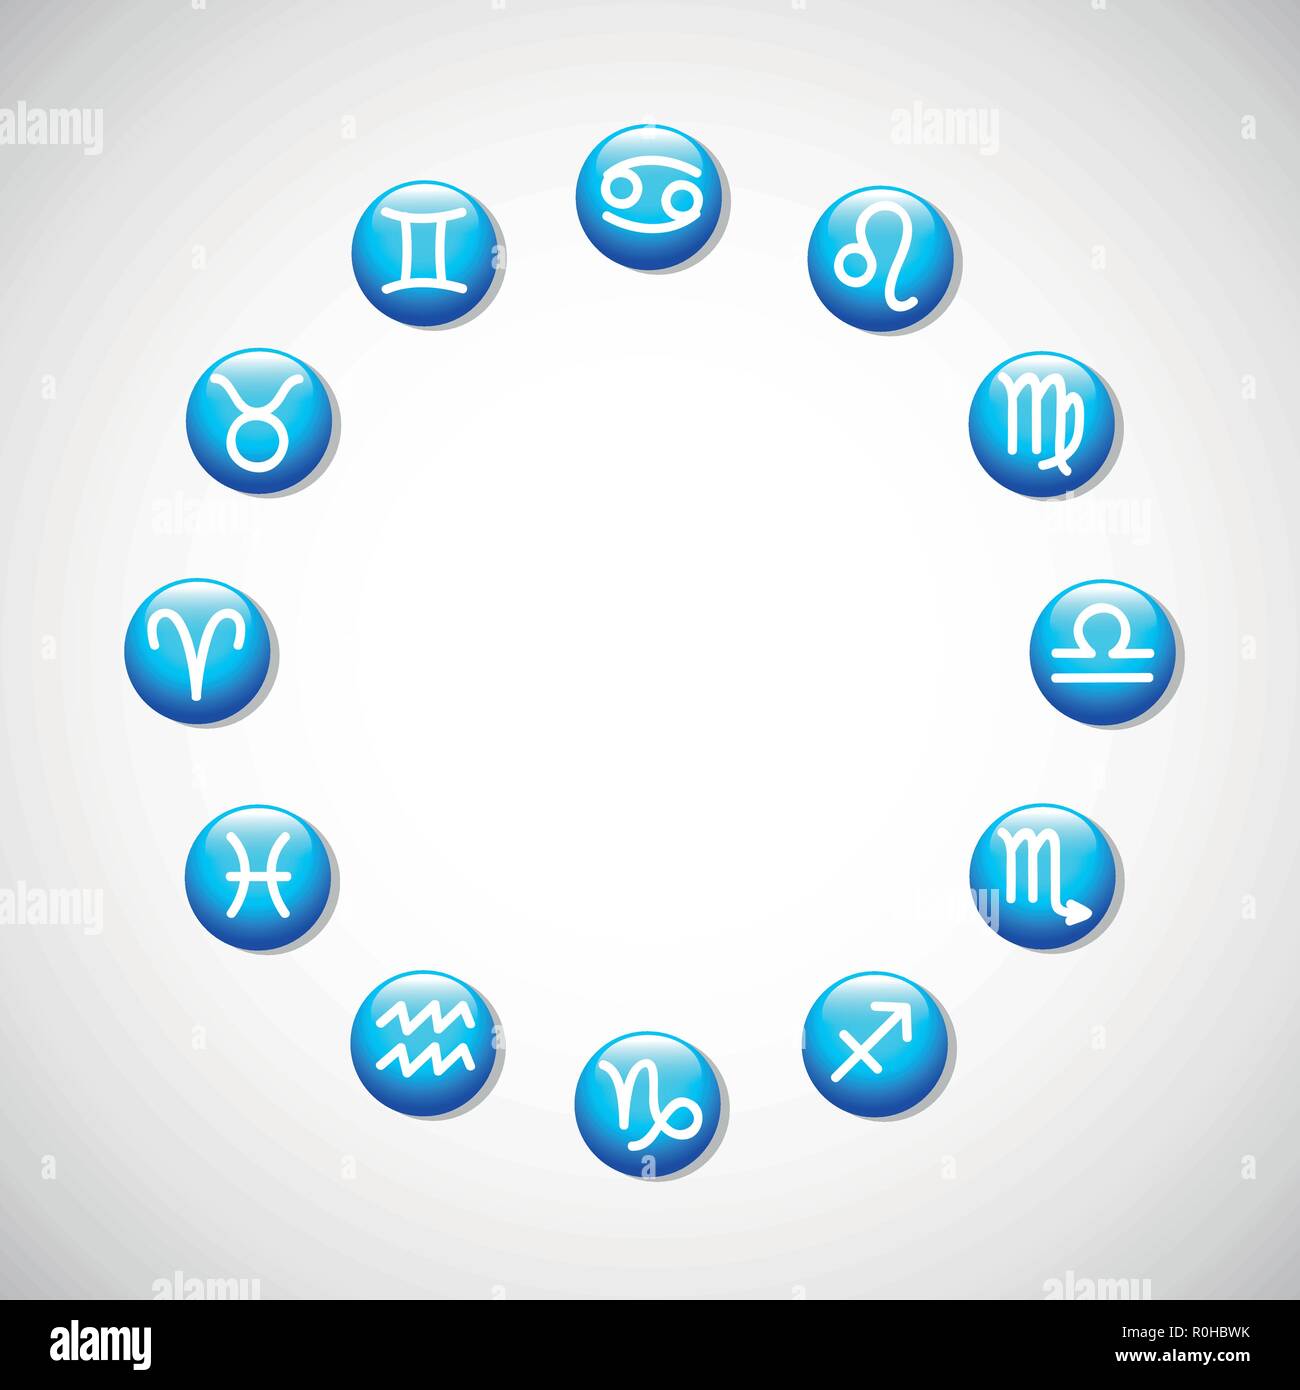 zodiac signs horoscope astrological symbols in a circle vector illustration EPS10 Stock Vector